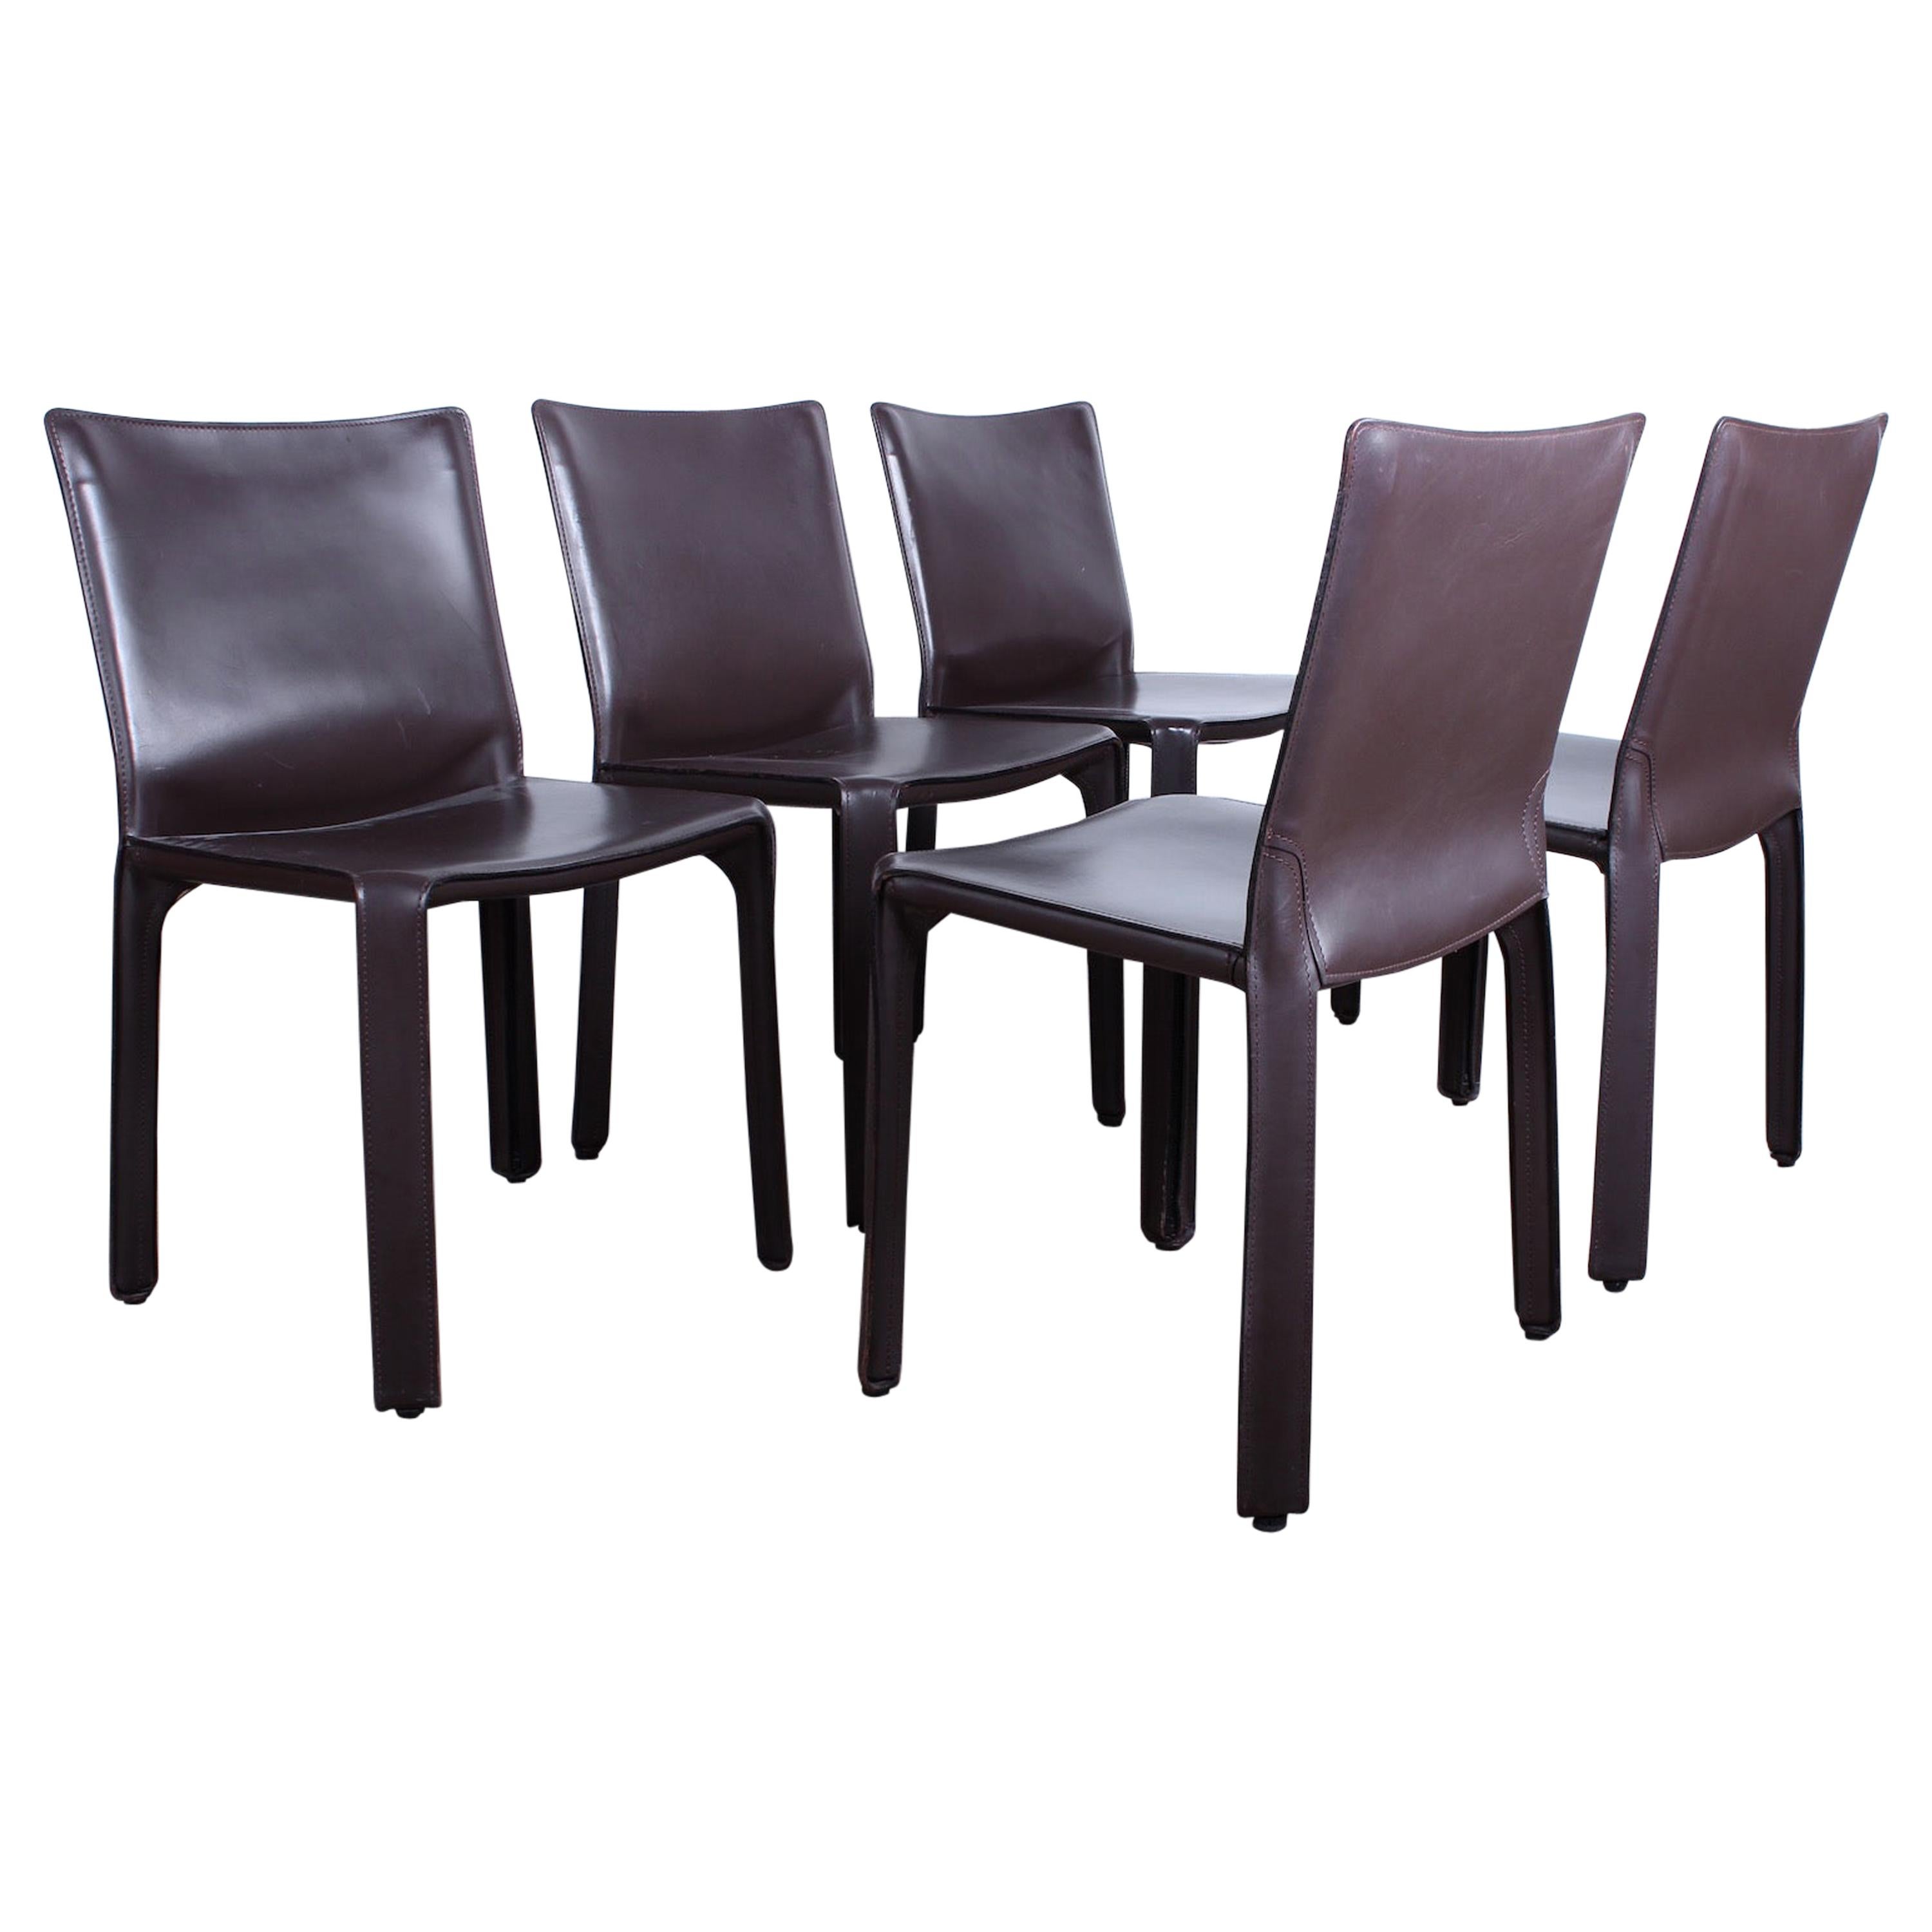 Set of Five Cab Chairs by Mario Bellini